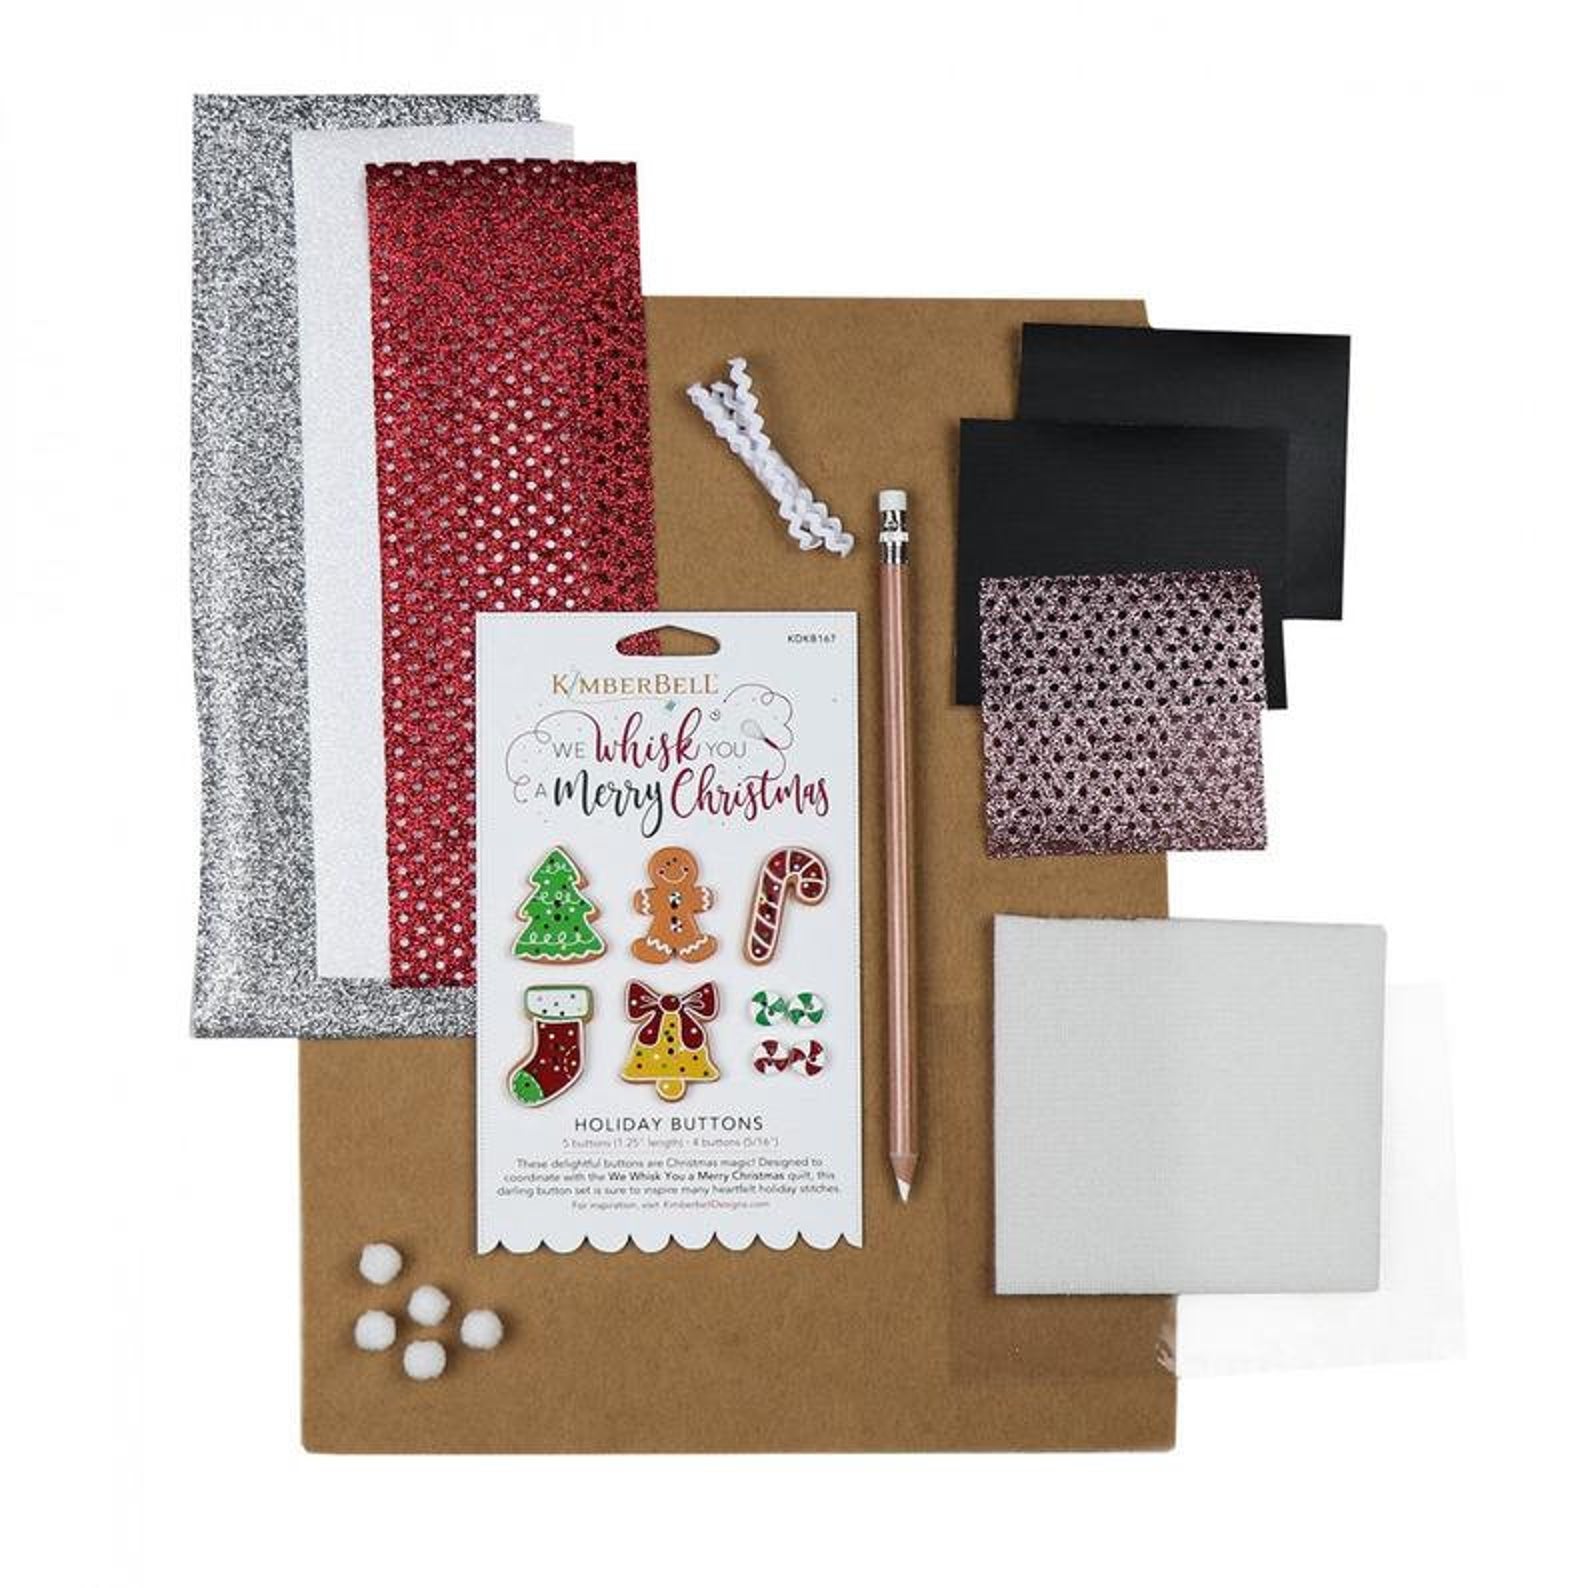 WE WHISK YOU A MERRY CHRISTMAS EMBELLISHMENT KIT